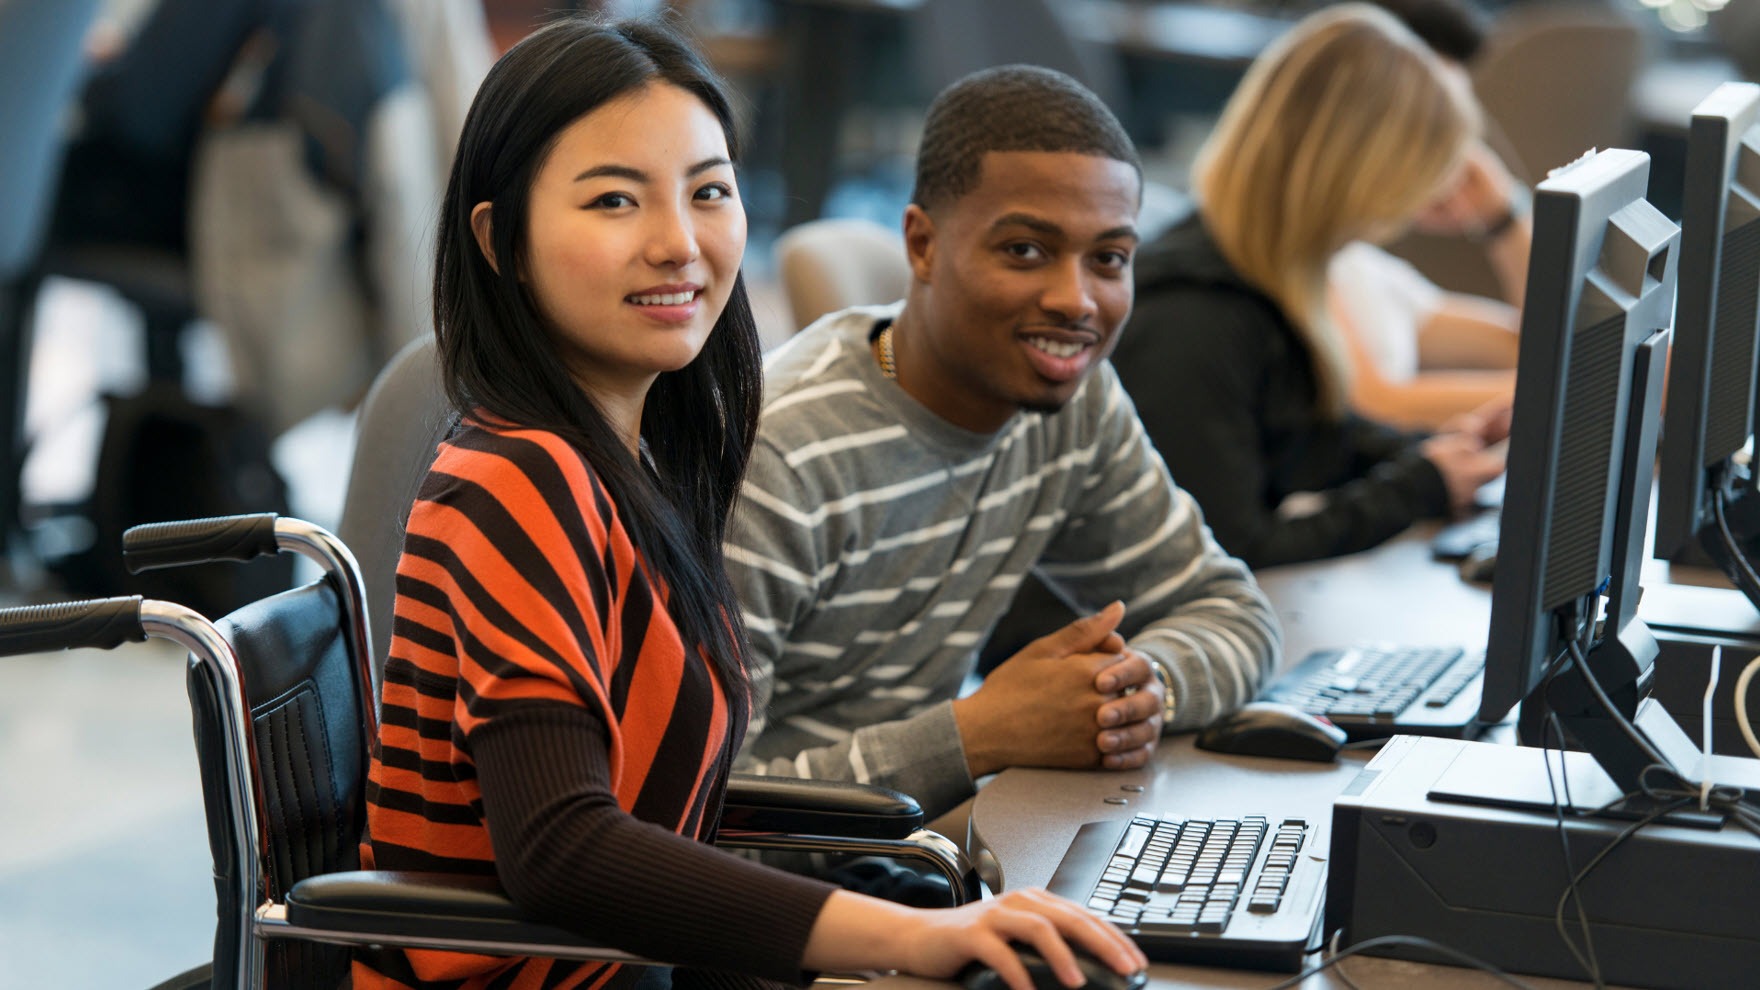 two students smiling while sitting at desktop computers